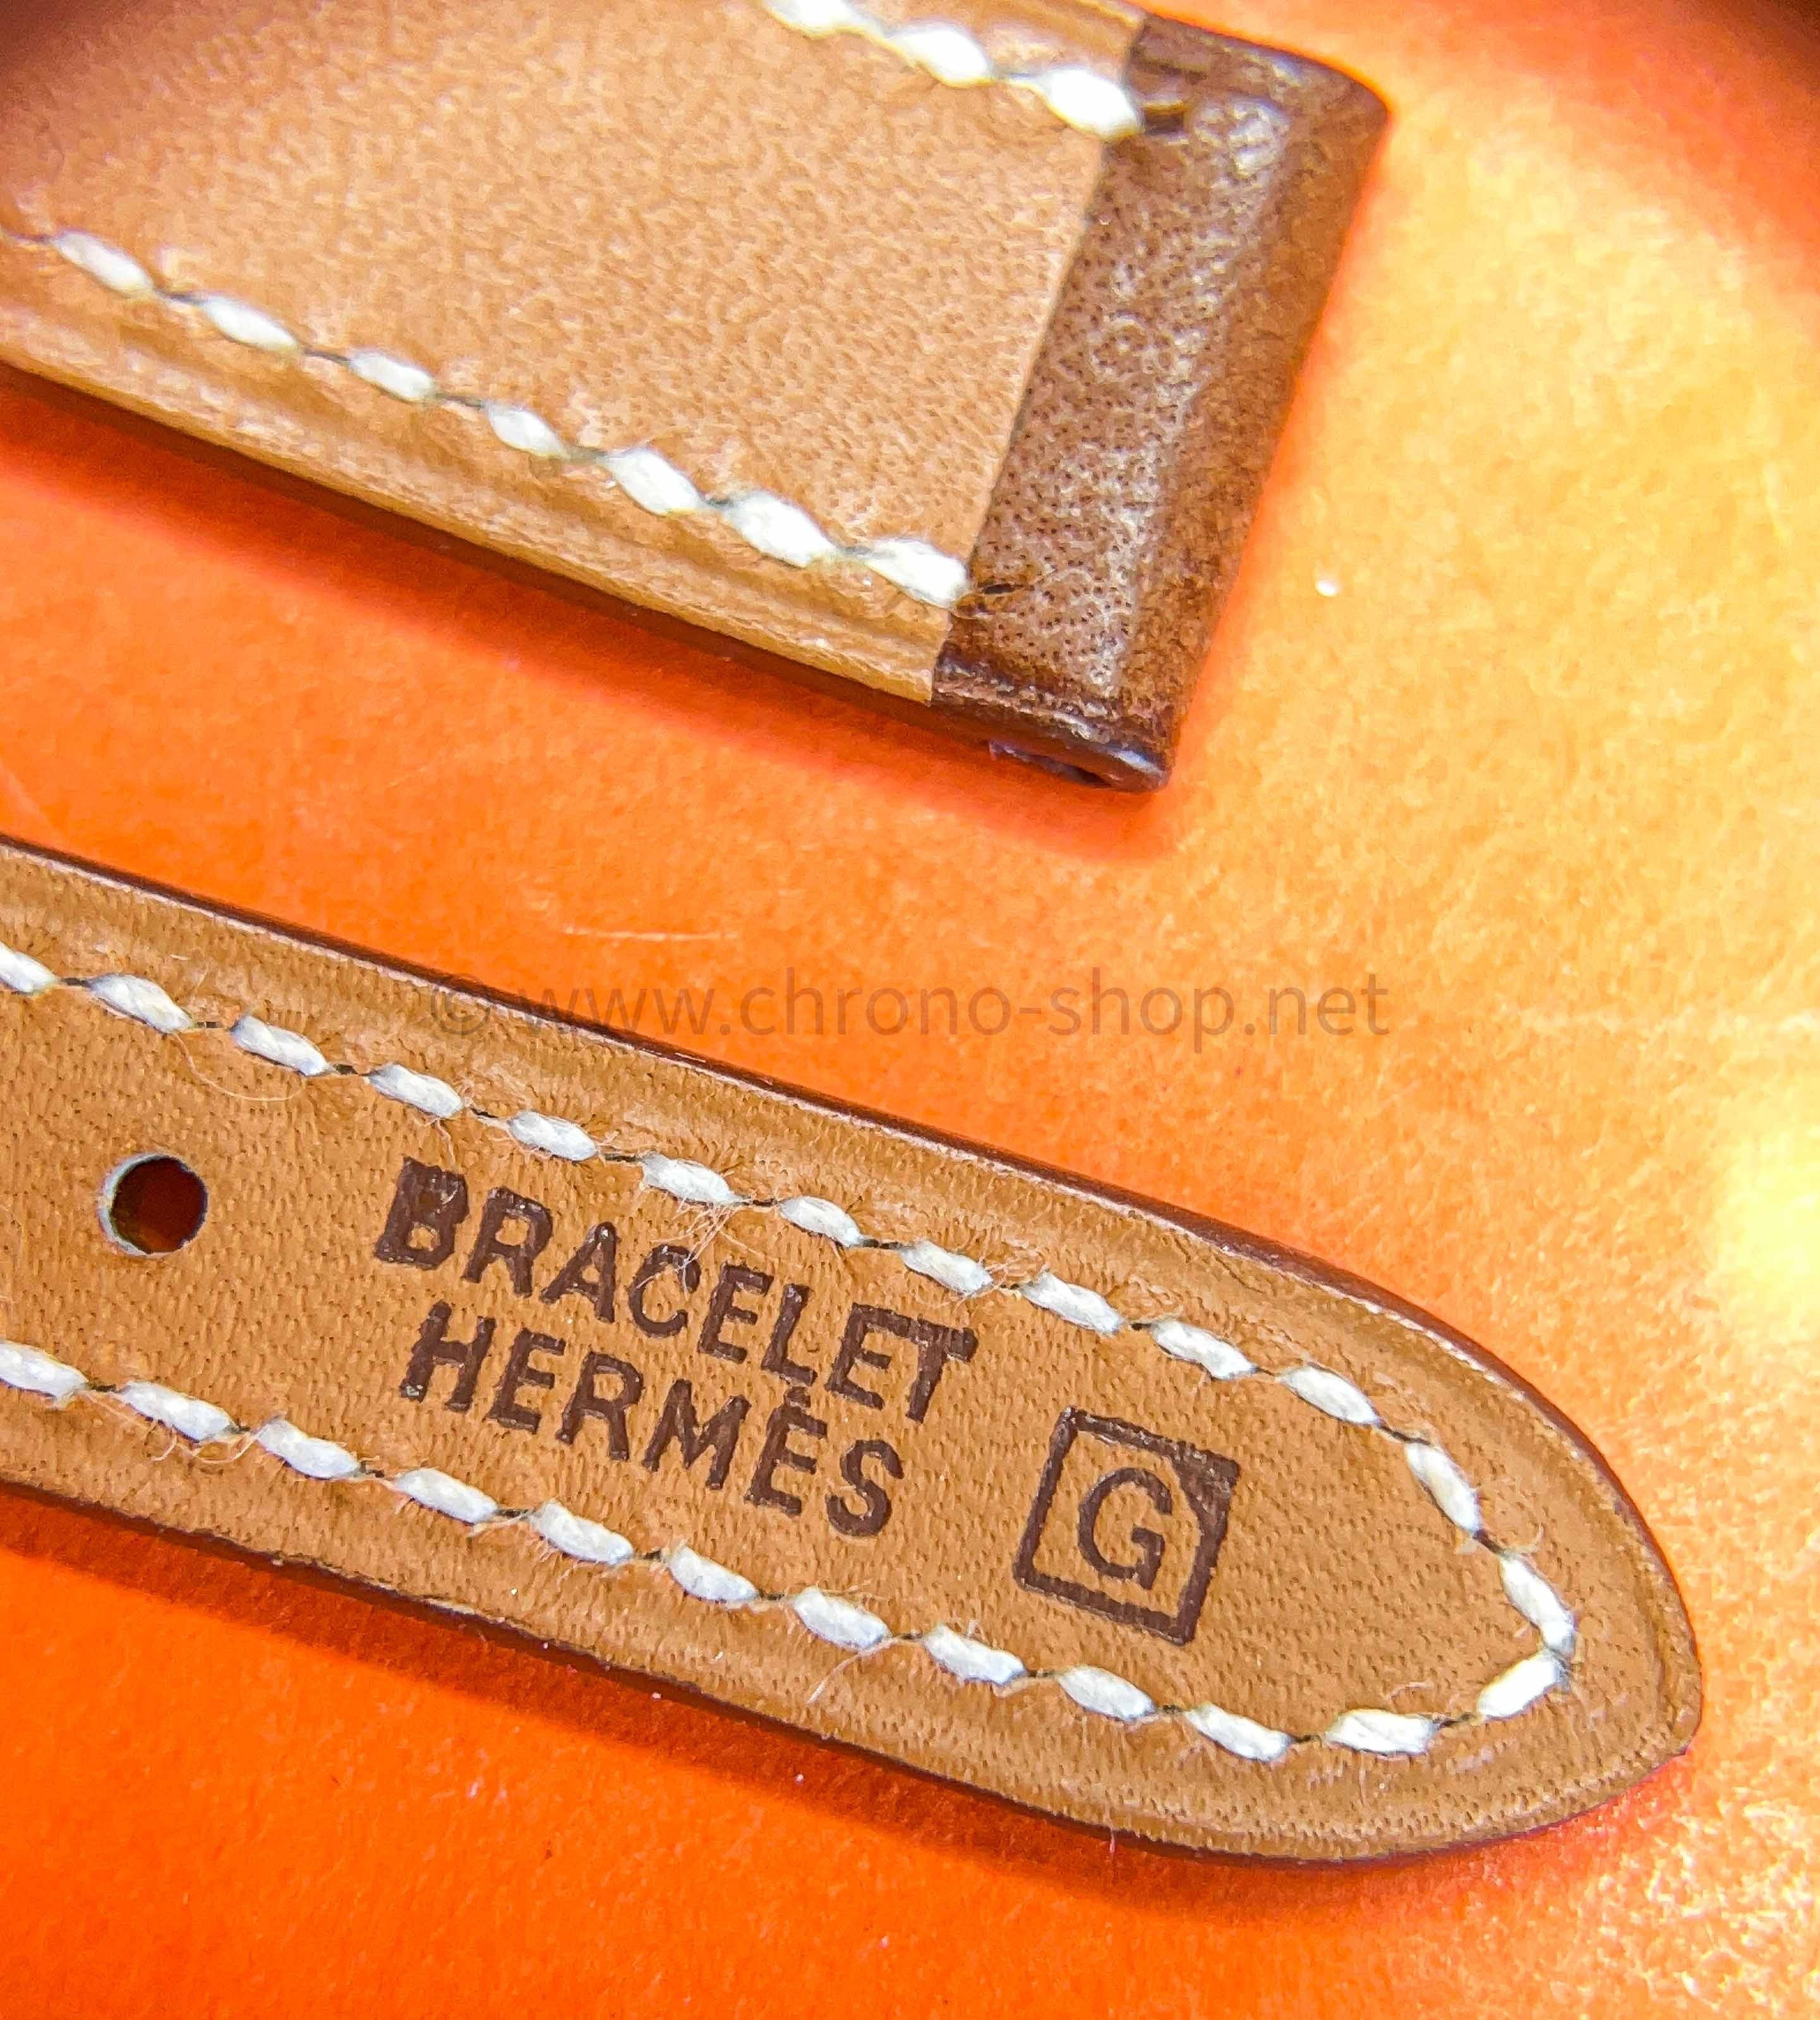 GENUINE Hermes WATCH STRAP BAND TOBACCO BROWN COLOR SMOOTH CALFSKIN LEATHER  12 mm x 10 mm NEW